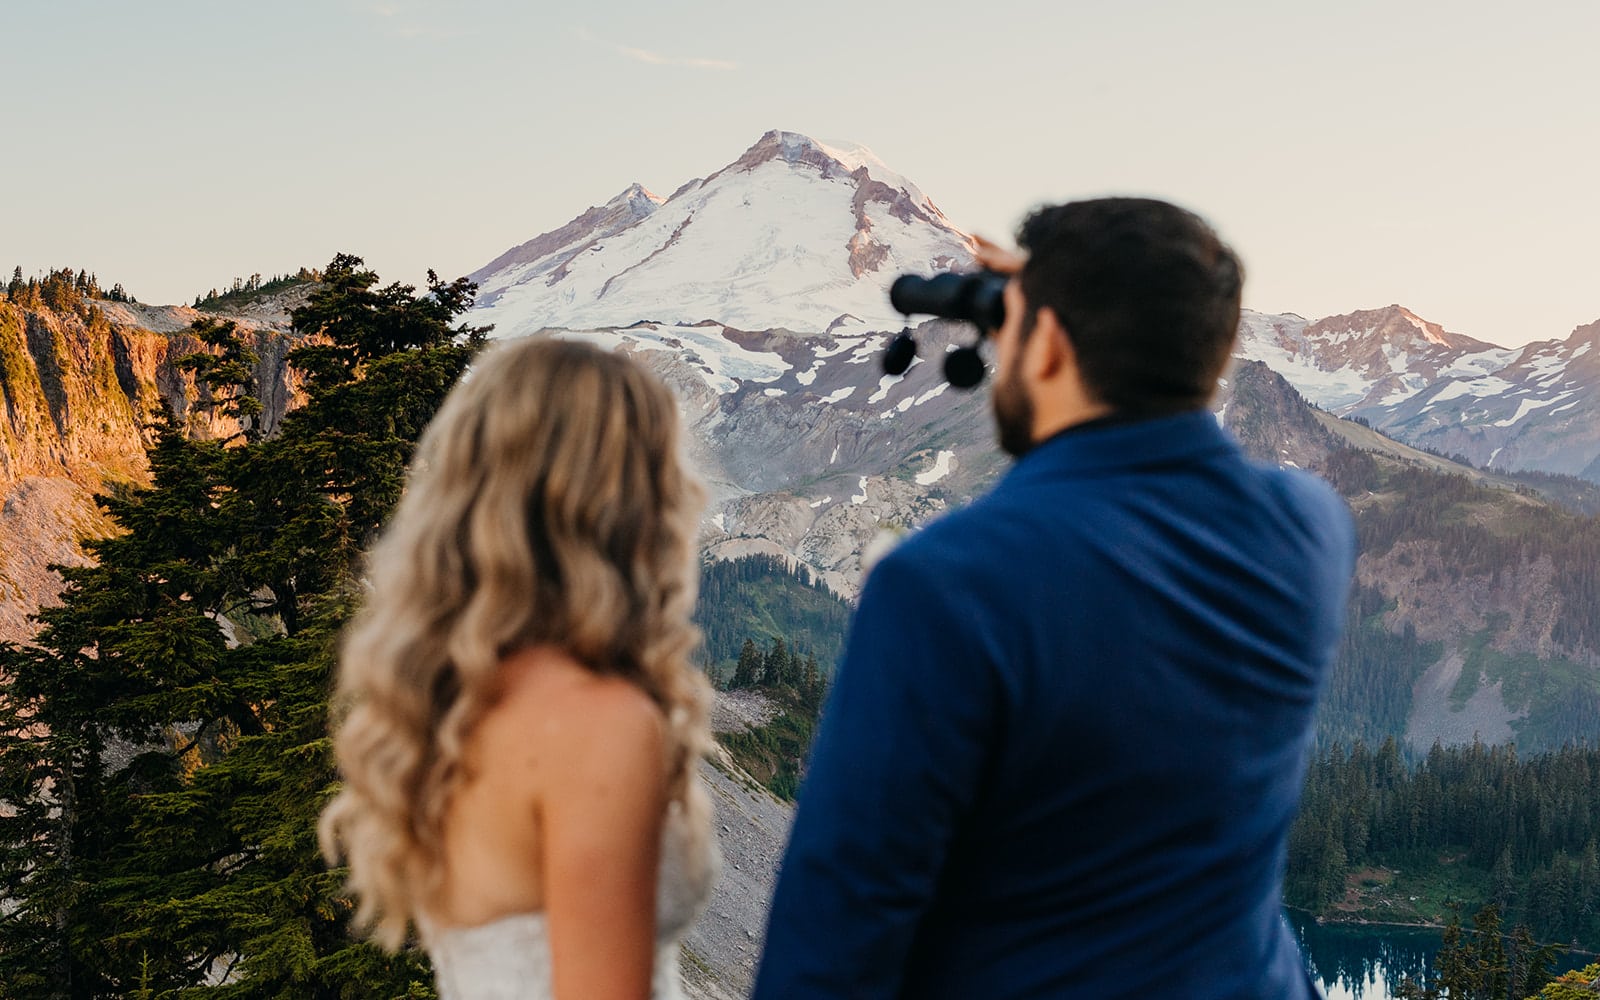 The couple looks at the mountain.